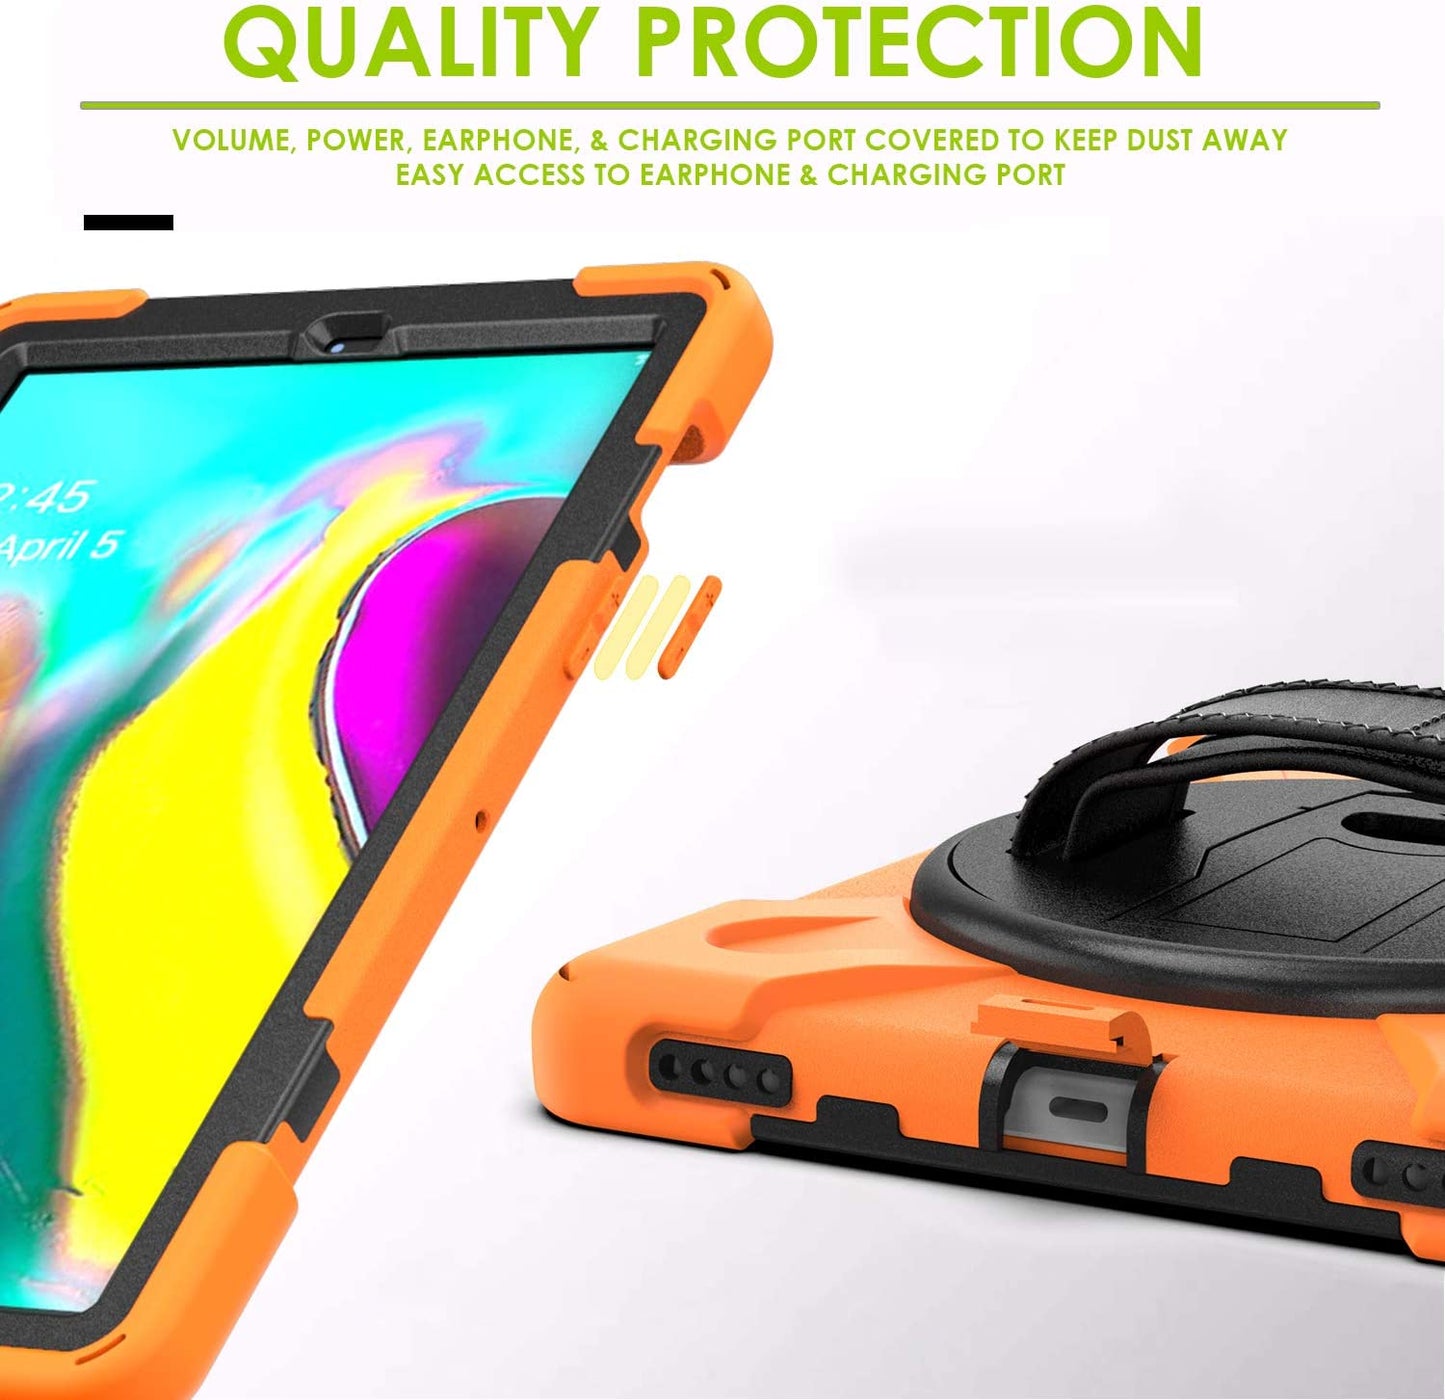 Yapears Shield Series Samsung Tab 10.1 Case SM-T510/T515 Samsung Galaxy Tab A 10.1 Case 2019 Shockproof Rugged Cover 360 Kickstand, Hand Strap & Shoulder Strap for Galaxy Tab A 10.1 Inch - Yellow